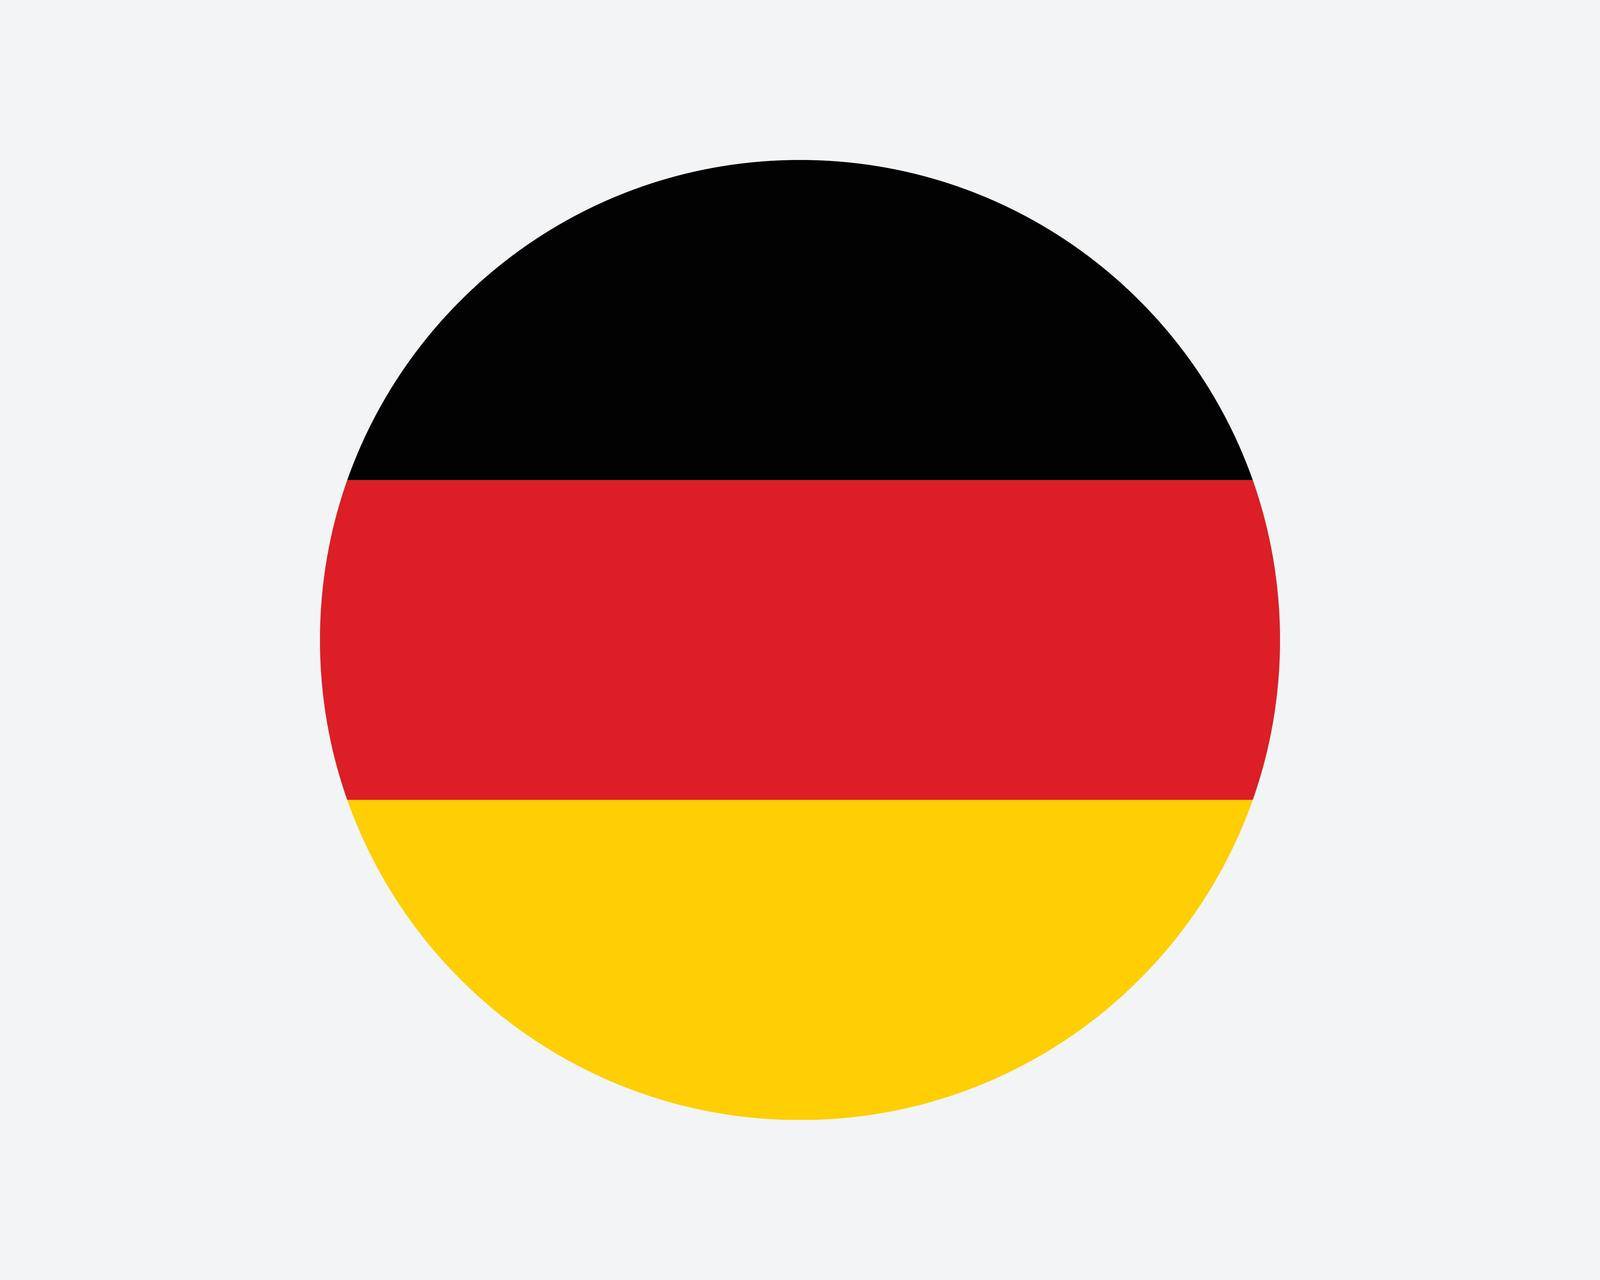 Germany Round Country Flag. German Circle National Flag. Federal Republic of Germany Circular Shape Button Banner. EPS Vector Illustration.